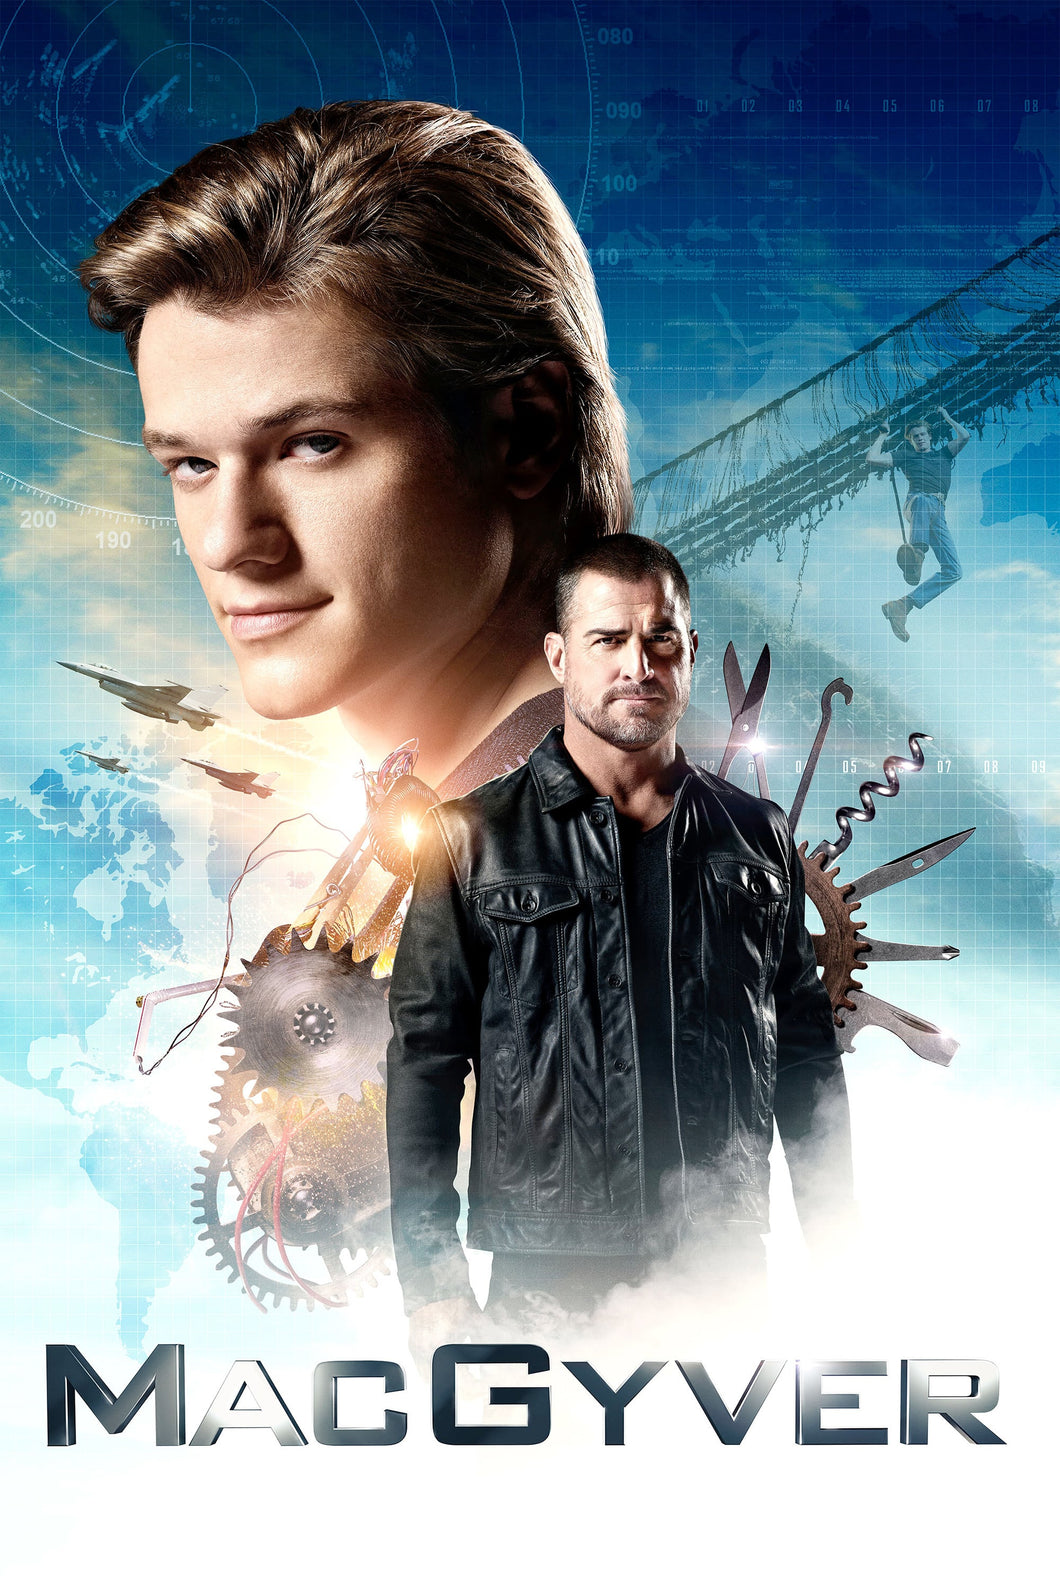 MacGyver TV Series High Quality Glossy Paper A1 A2 A3 A4 A3 Framed or Unframed!!!